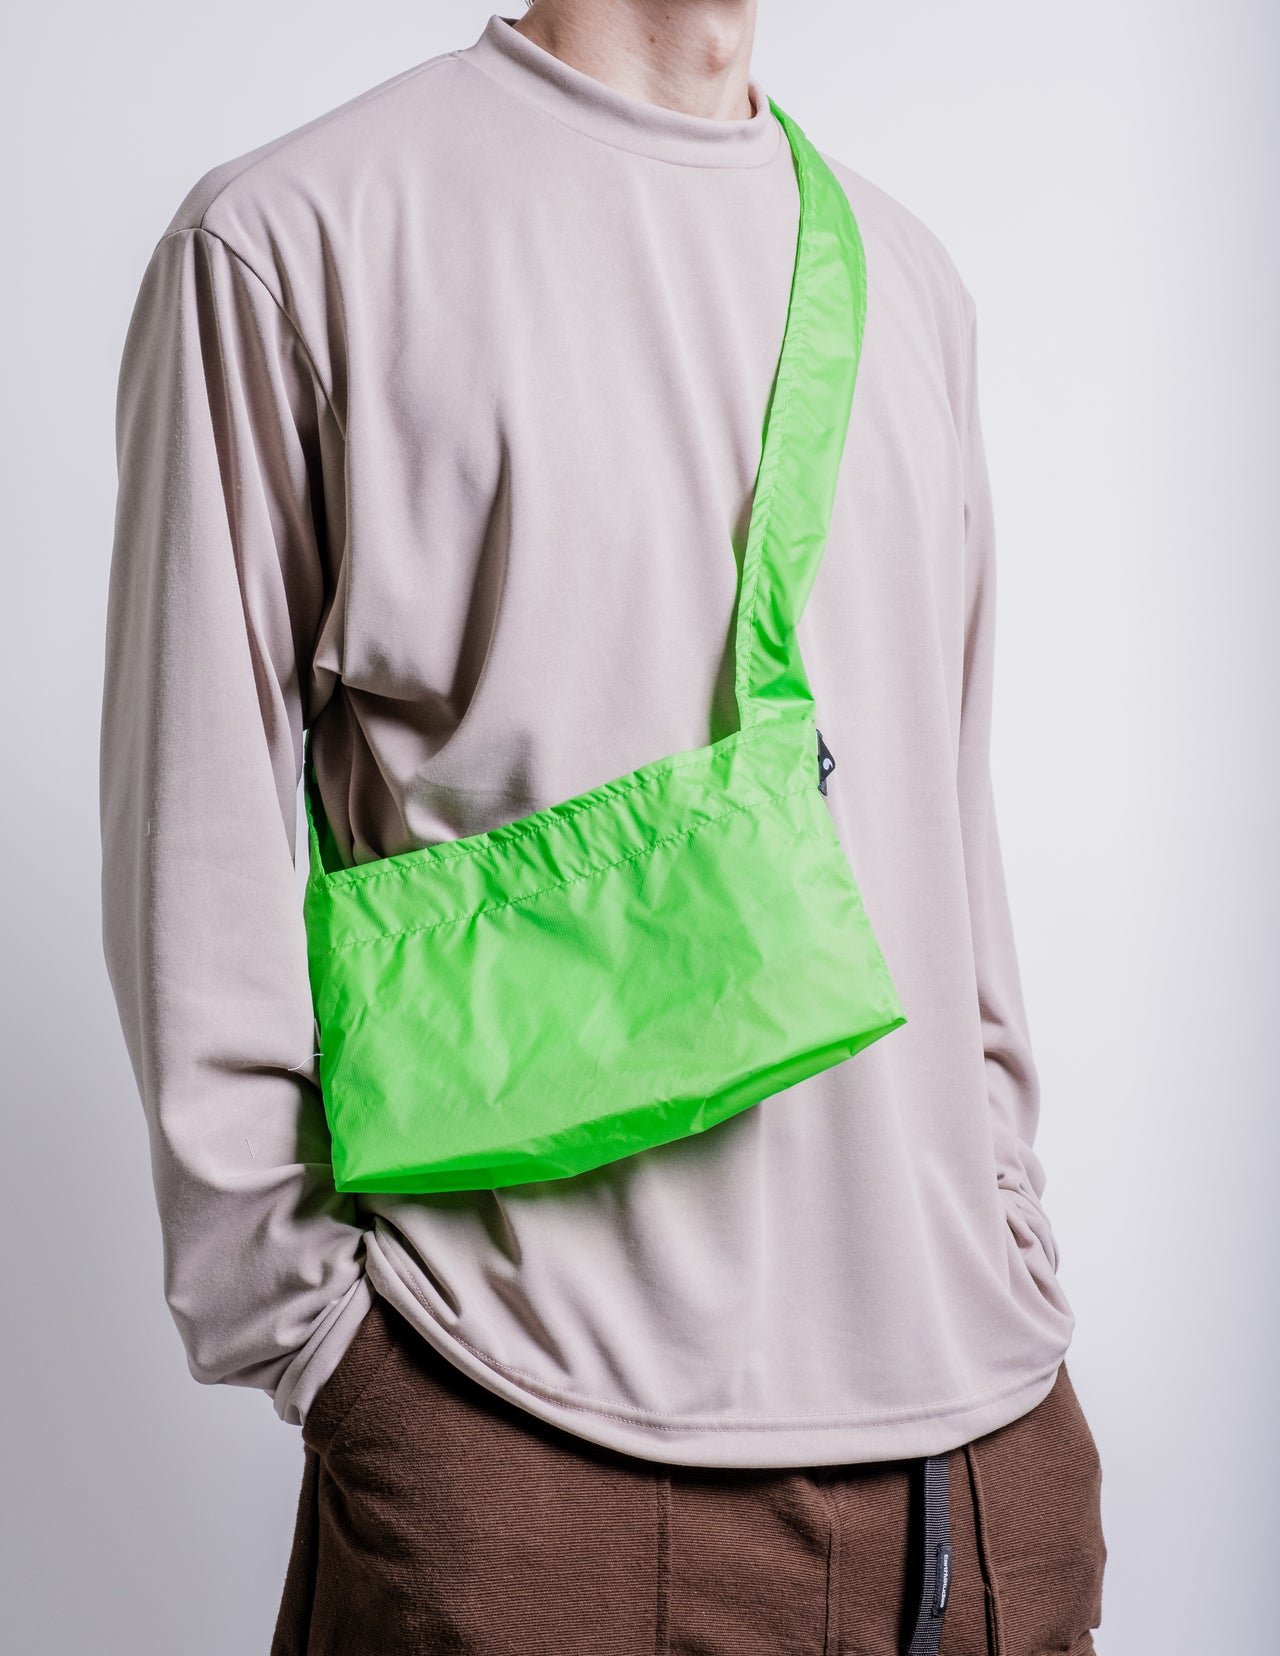 Sling One in Green